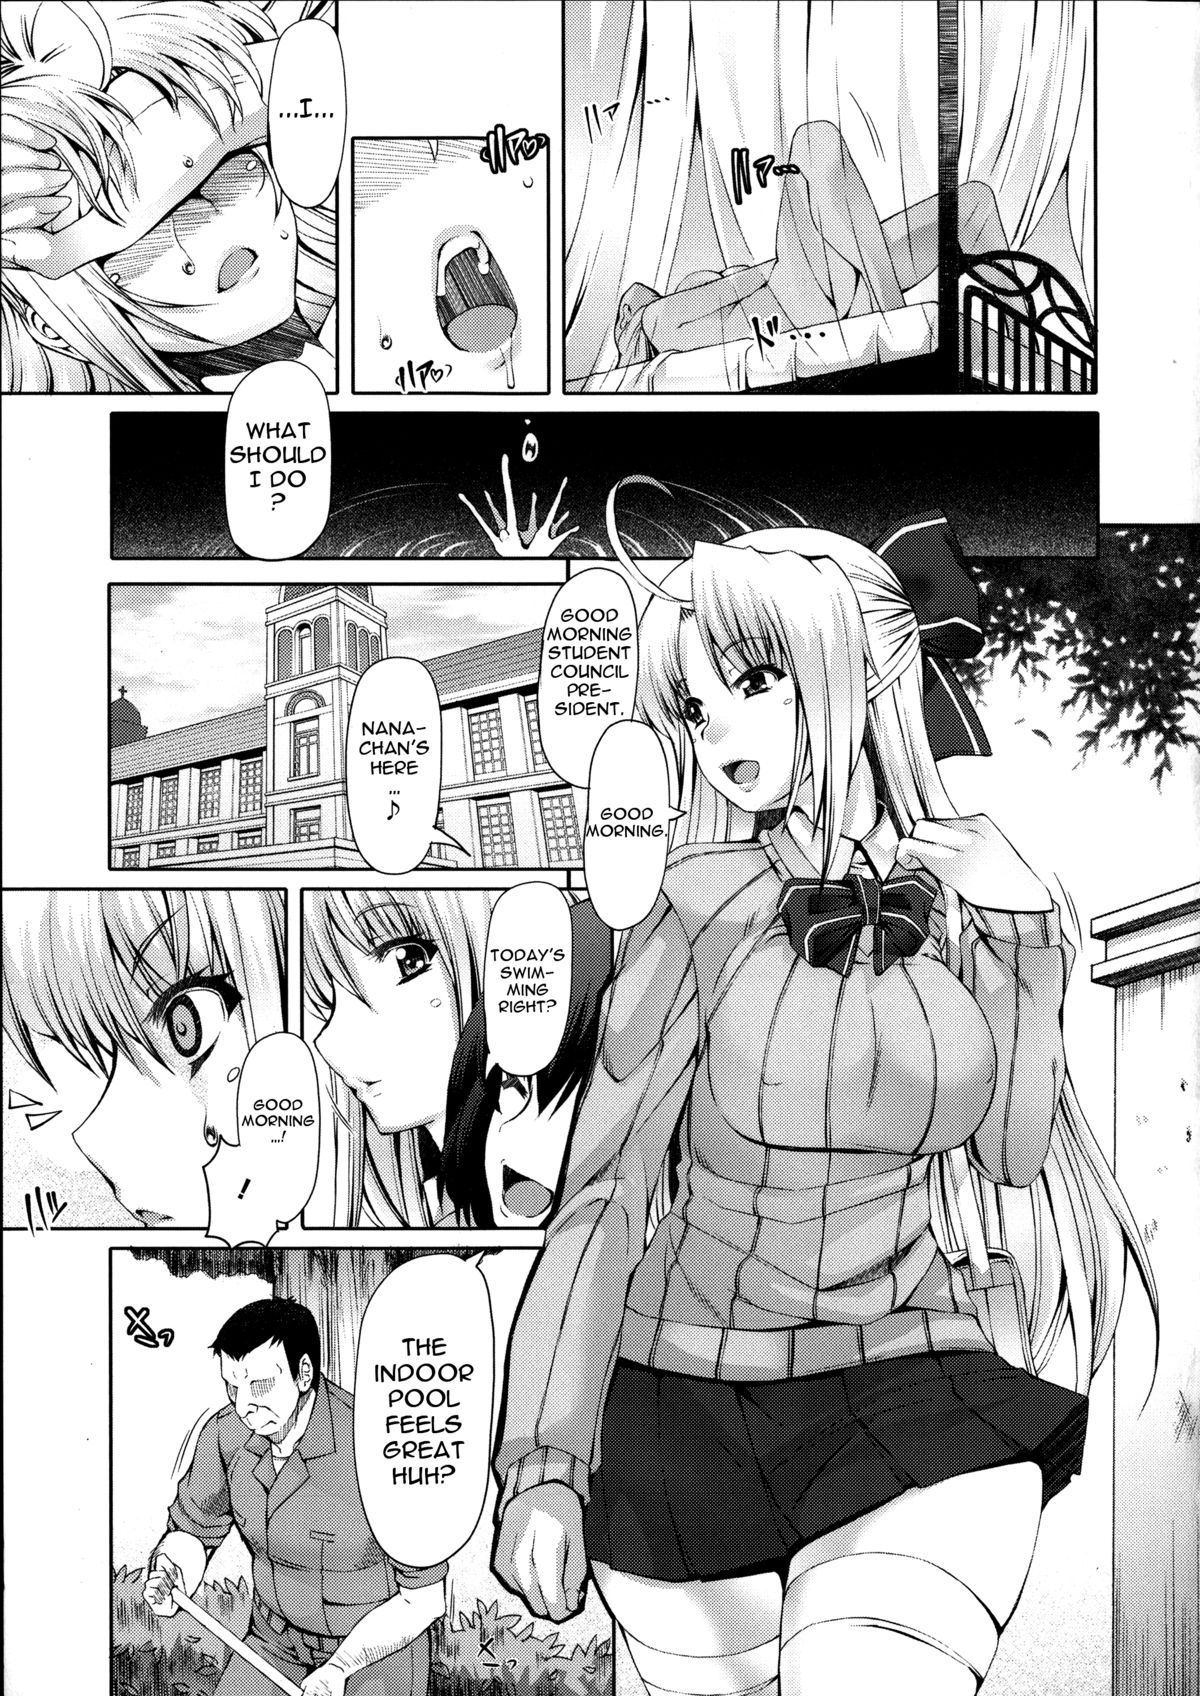 [RED-RUM] LOVE&PEACH Ch. 0-2 [English] {doujin-moe.us} page 48 full